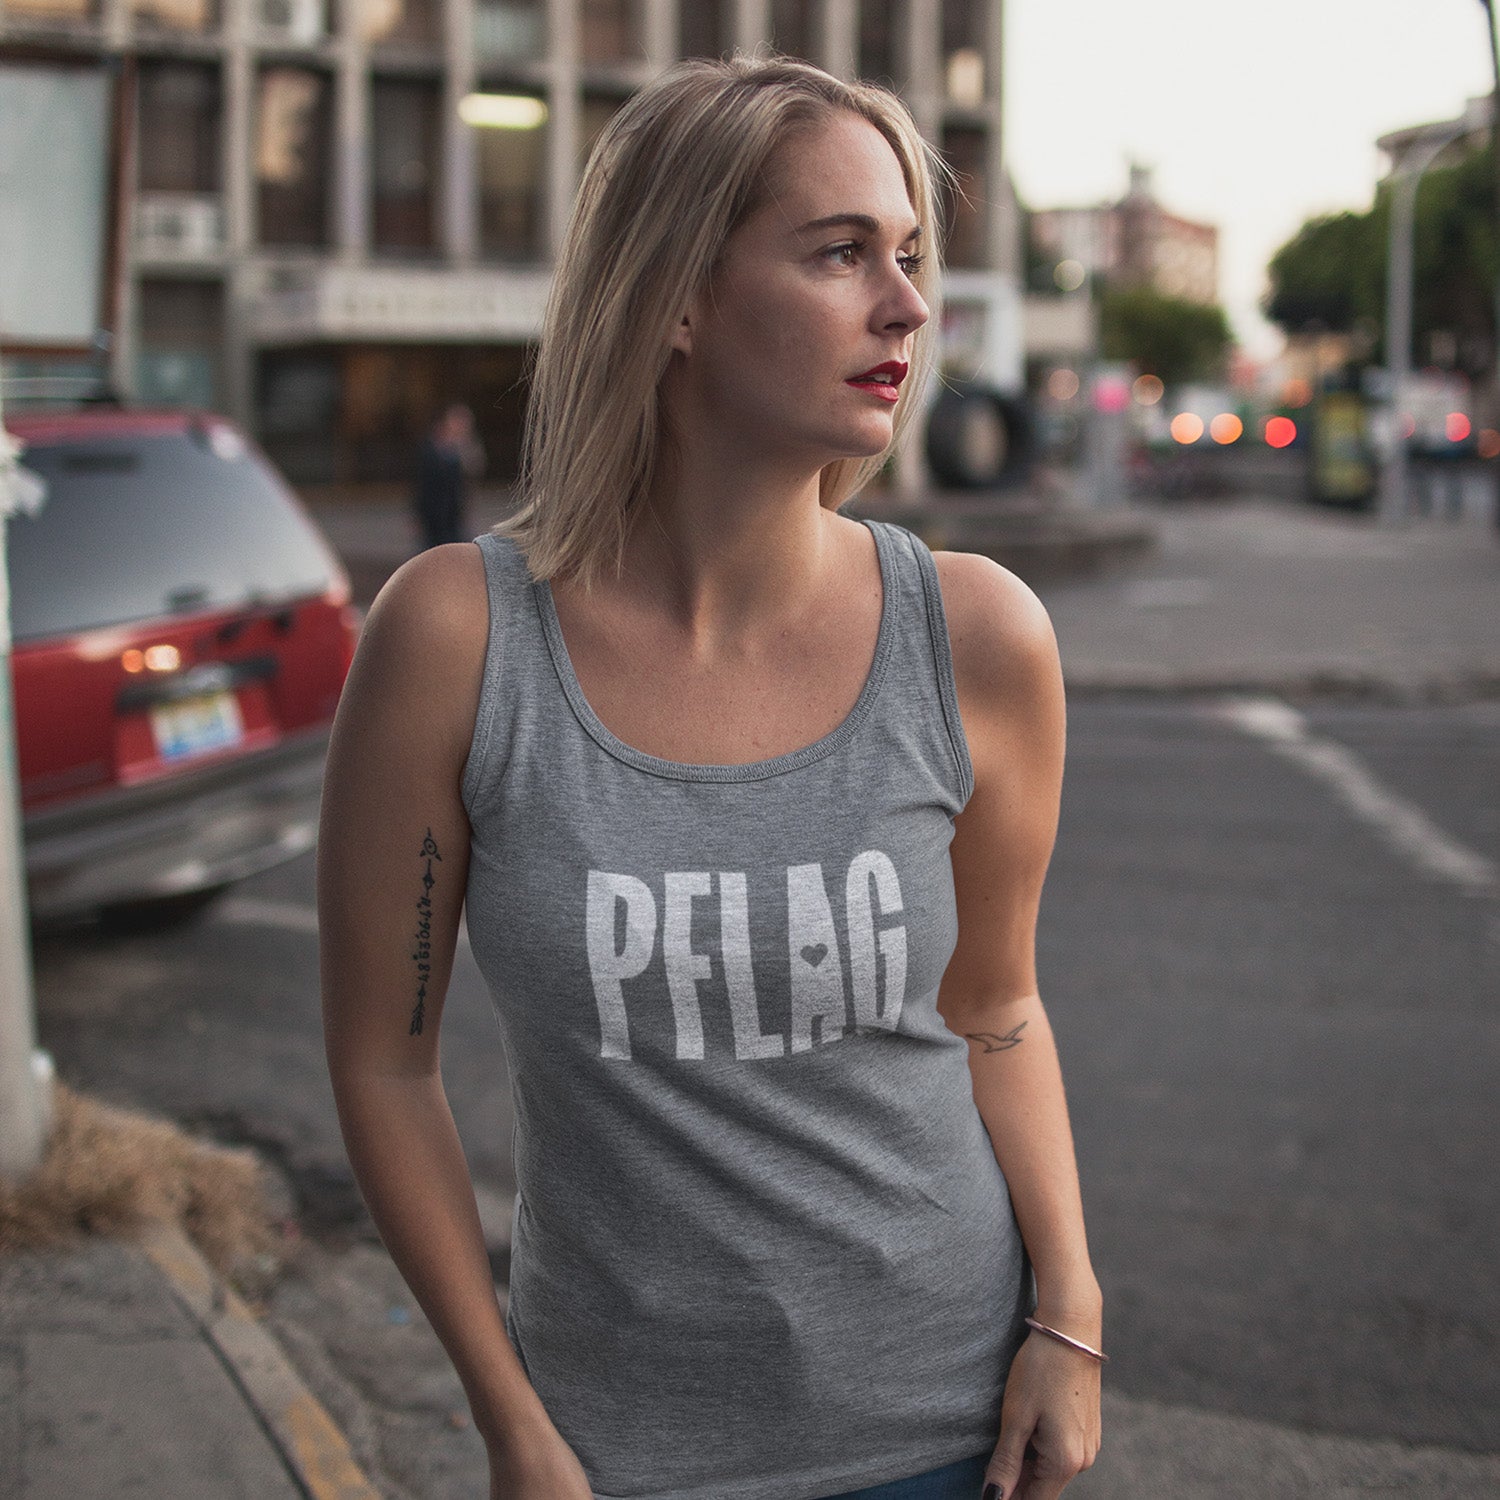 PFLAG Logo - Fitted-Cut Tank Top